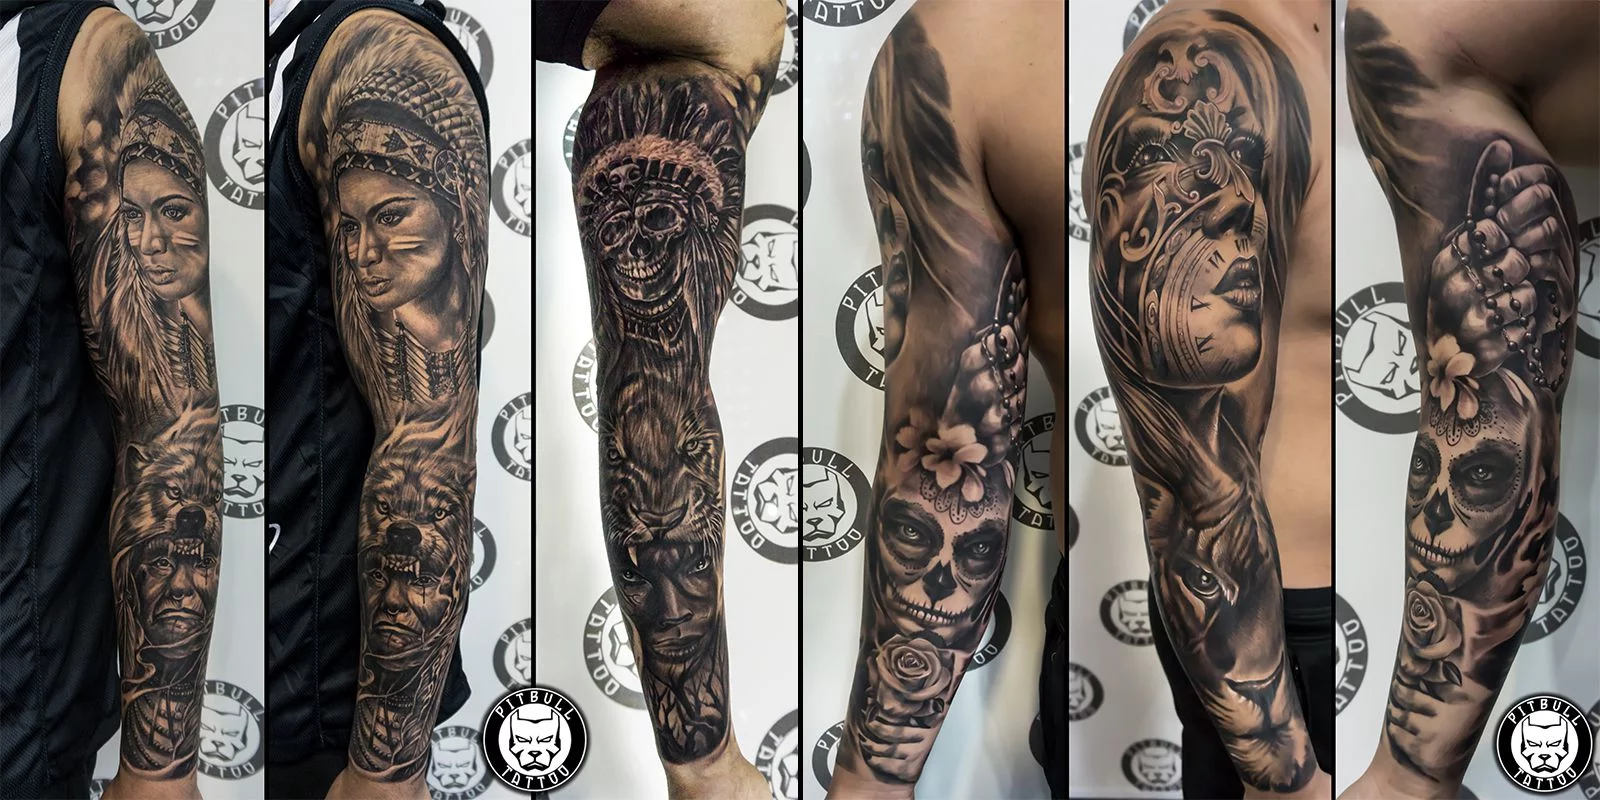 Black and grey tattoos - Everything you need to know